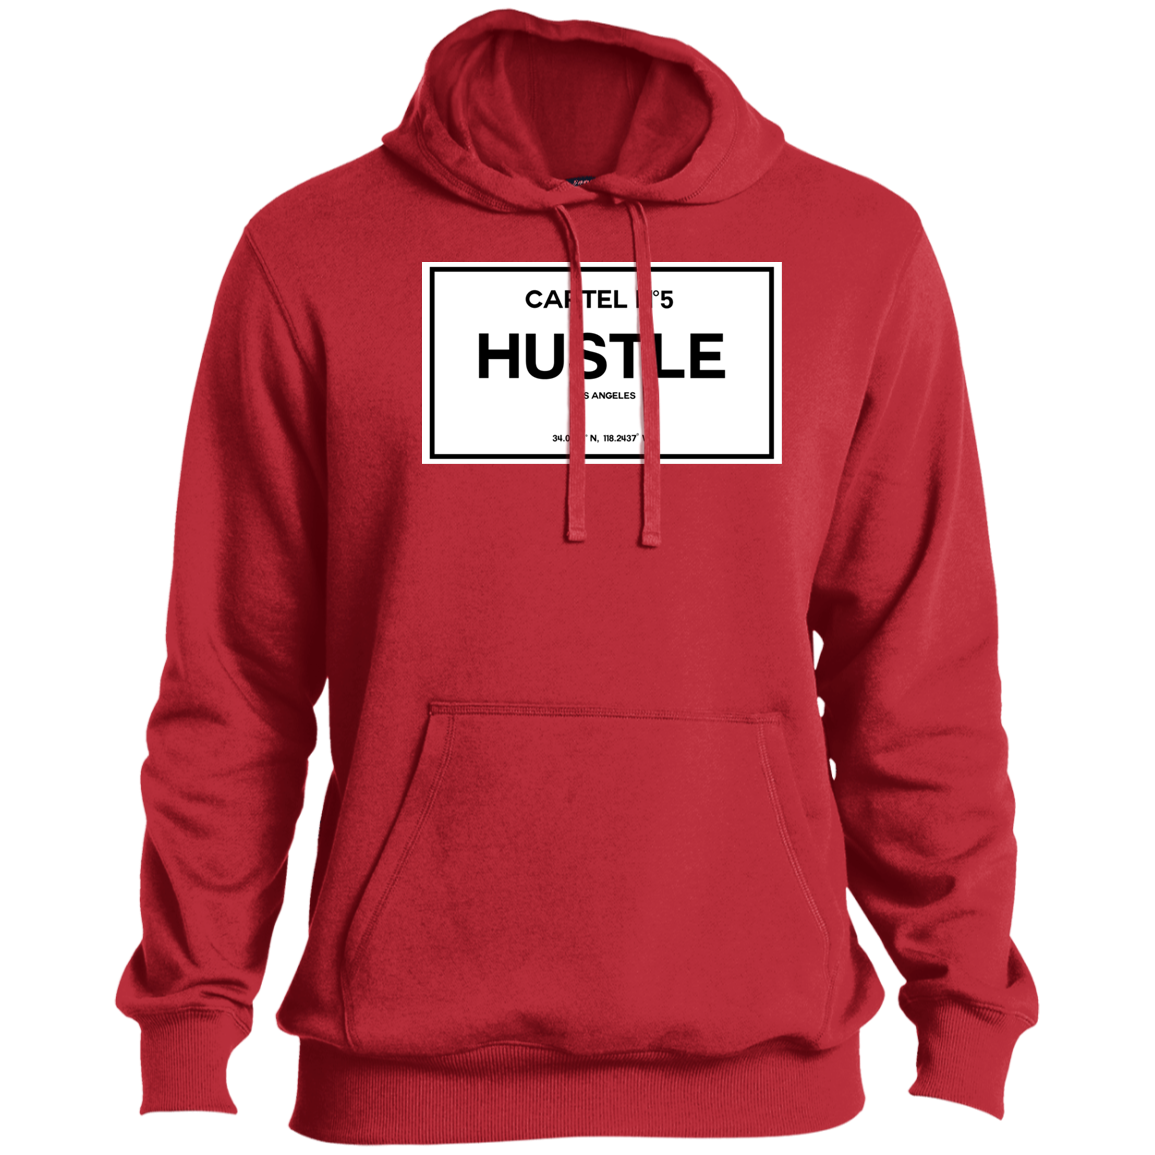 Cartel No 5 Hustle Tall Pullover Hoodie - Hustle Everything